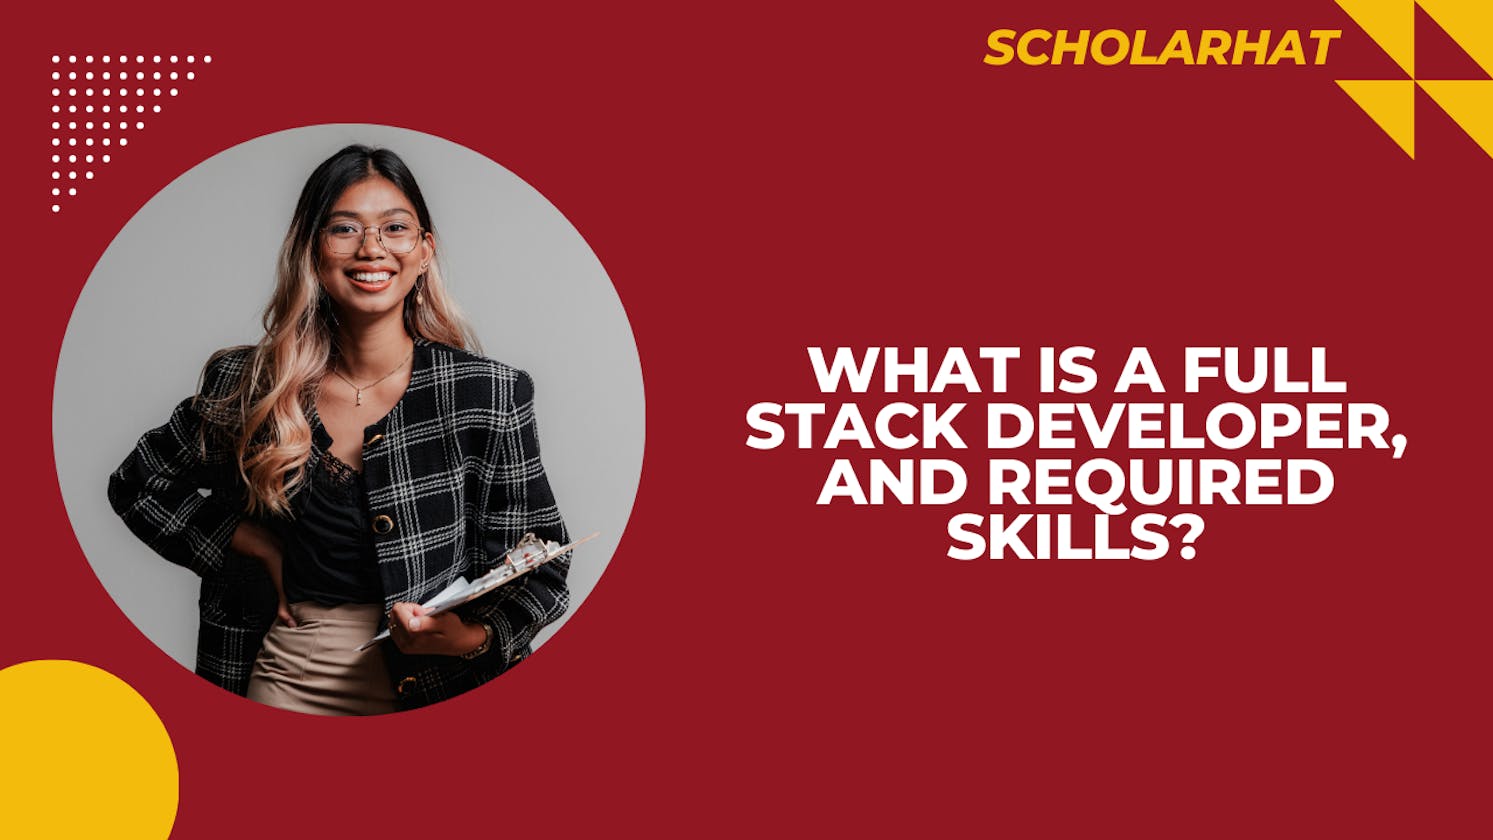 What Is a Full Stack Developer, and Required Skills?